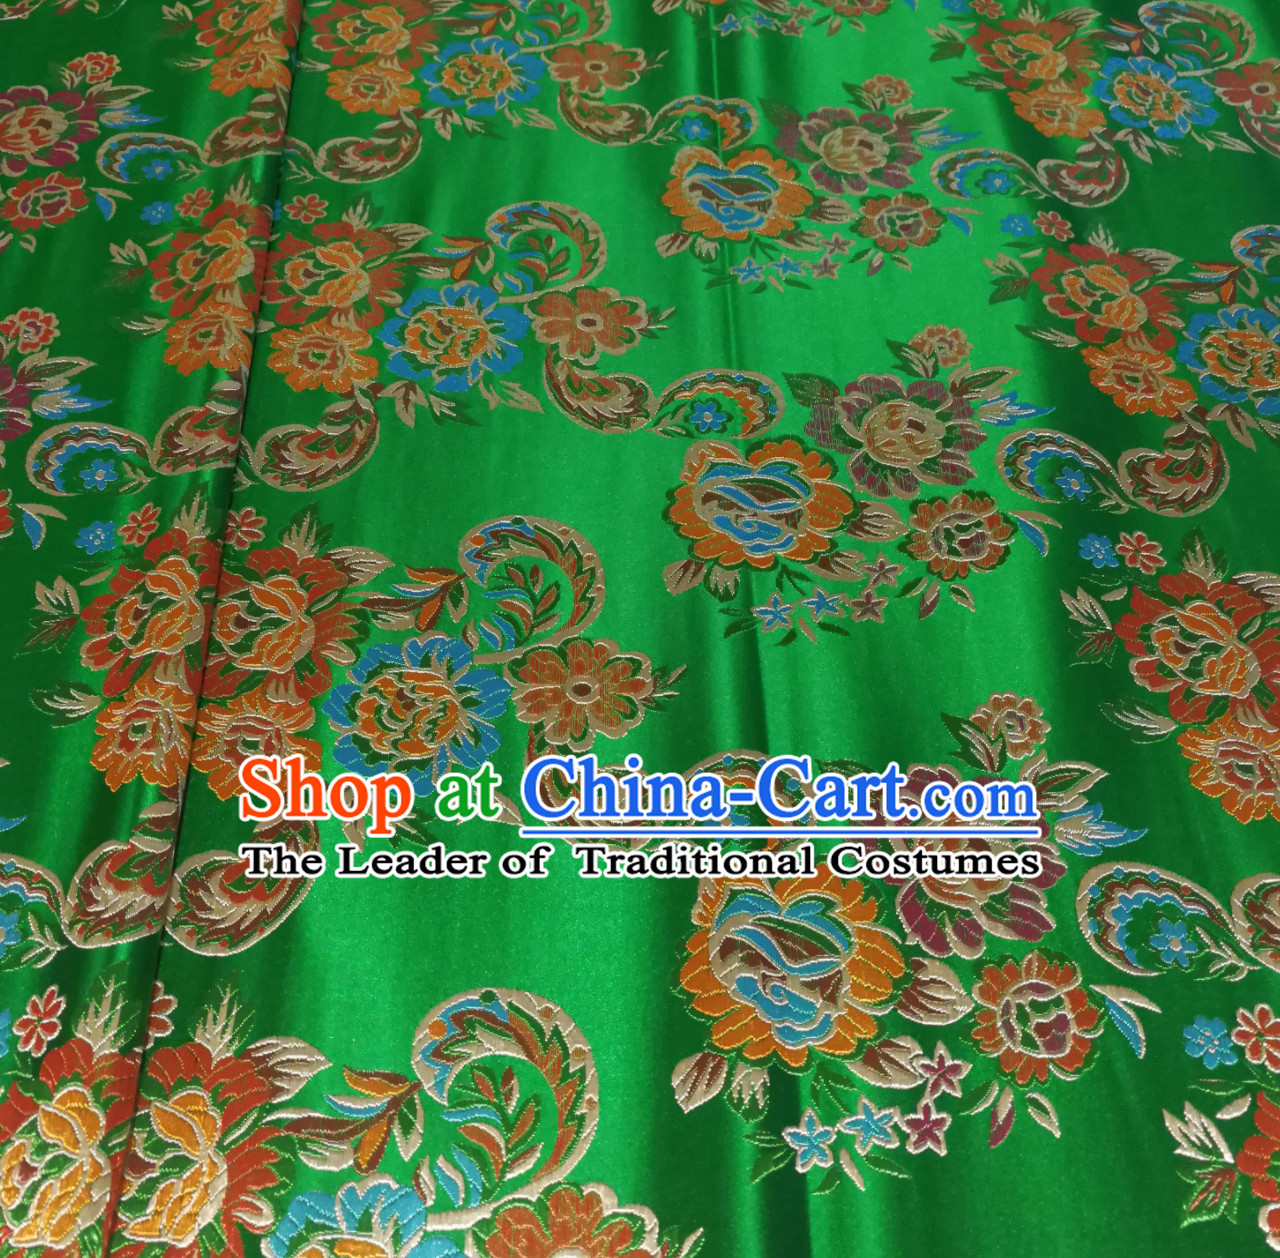 Royal Green Color Chinese Royal Palace Style Traditional Flower Peony Pattern Design Brocade Fabric Silk Fabric Chinese Fabric Asian Material